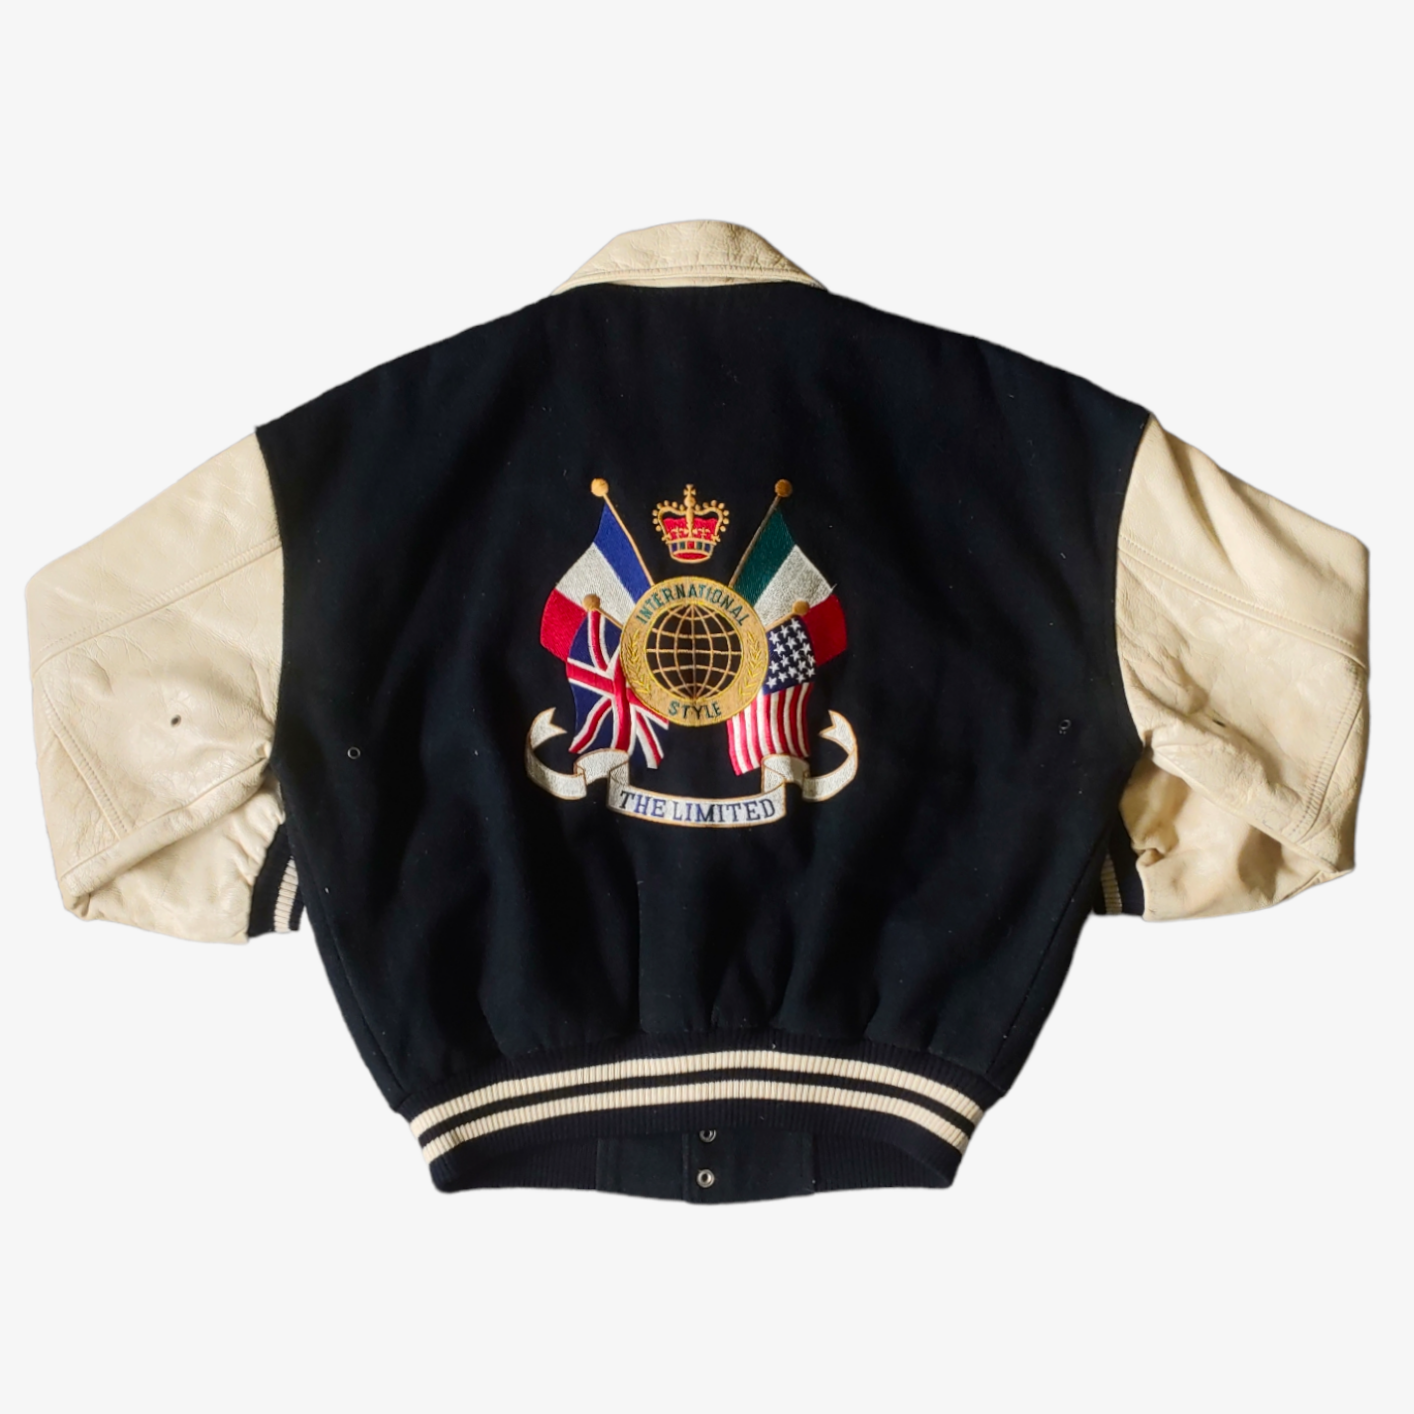 Vintage 90s The Limited International Style World Flags Leather Varsity Jacket Back - Casspios Dream